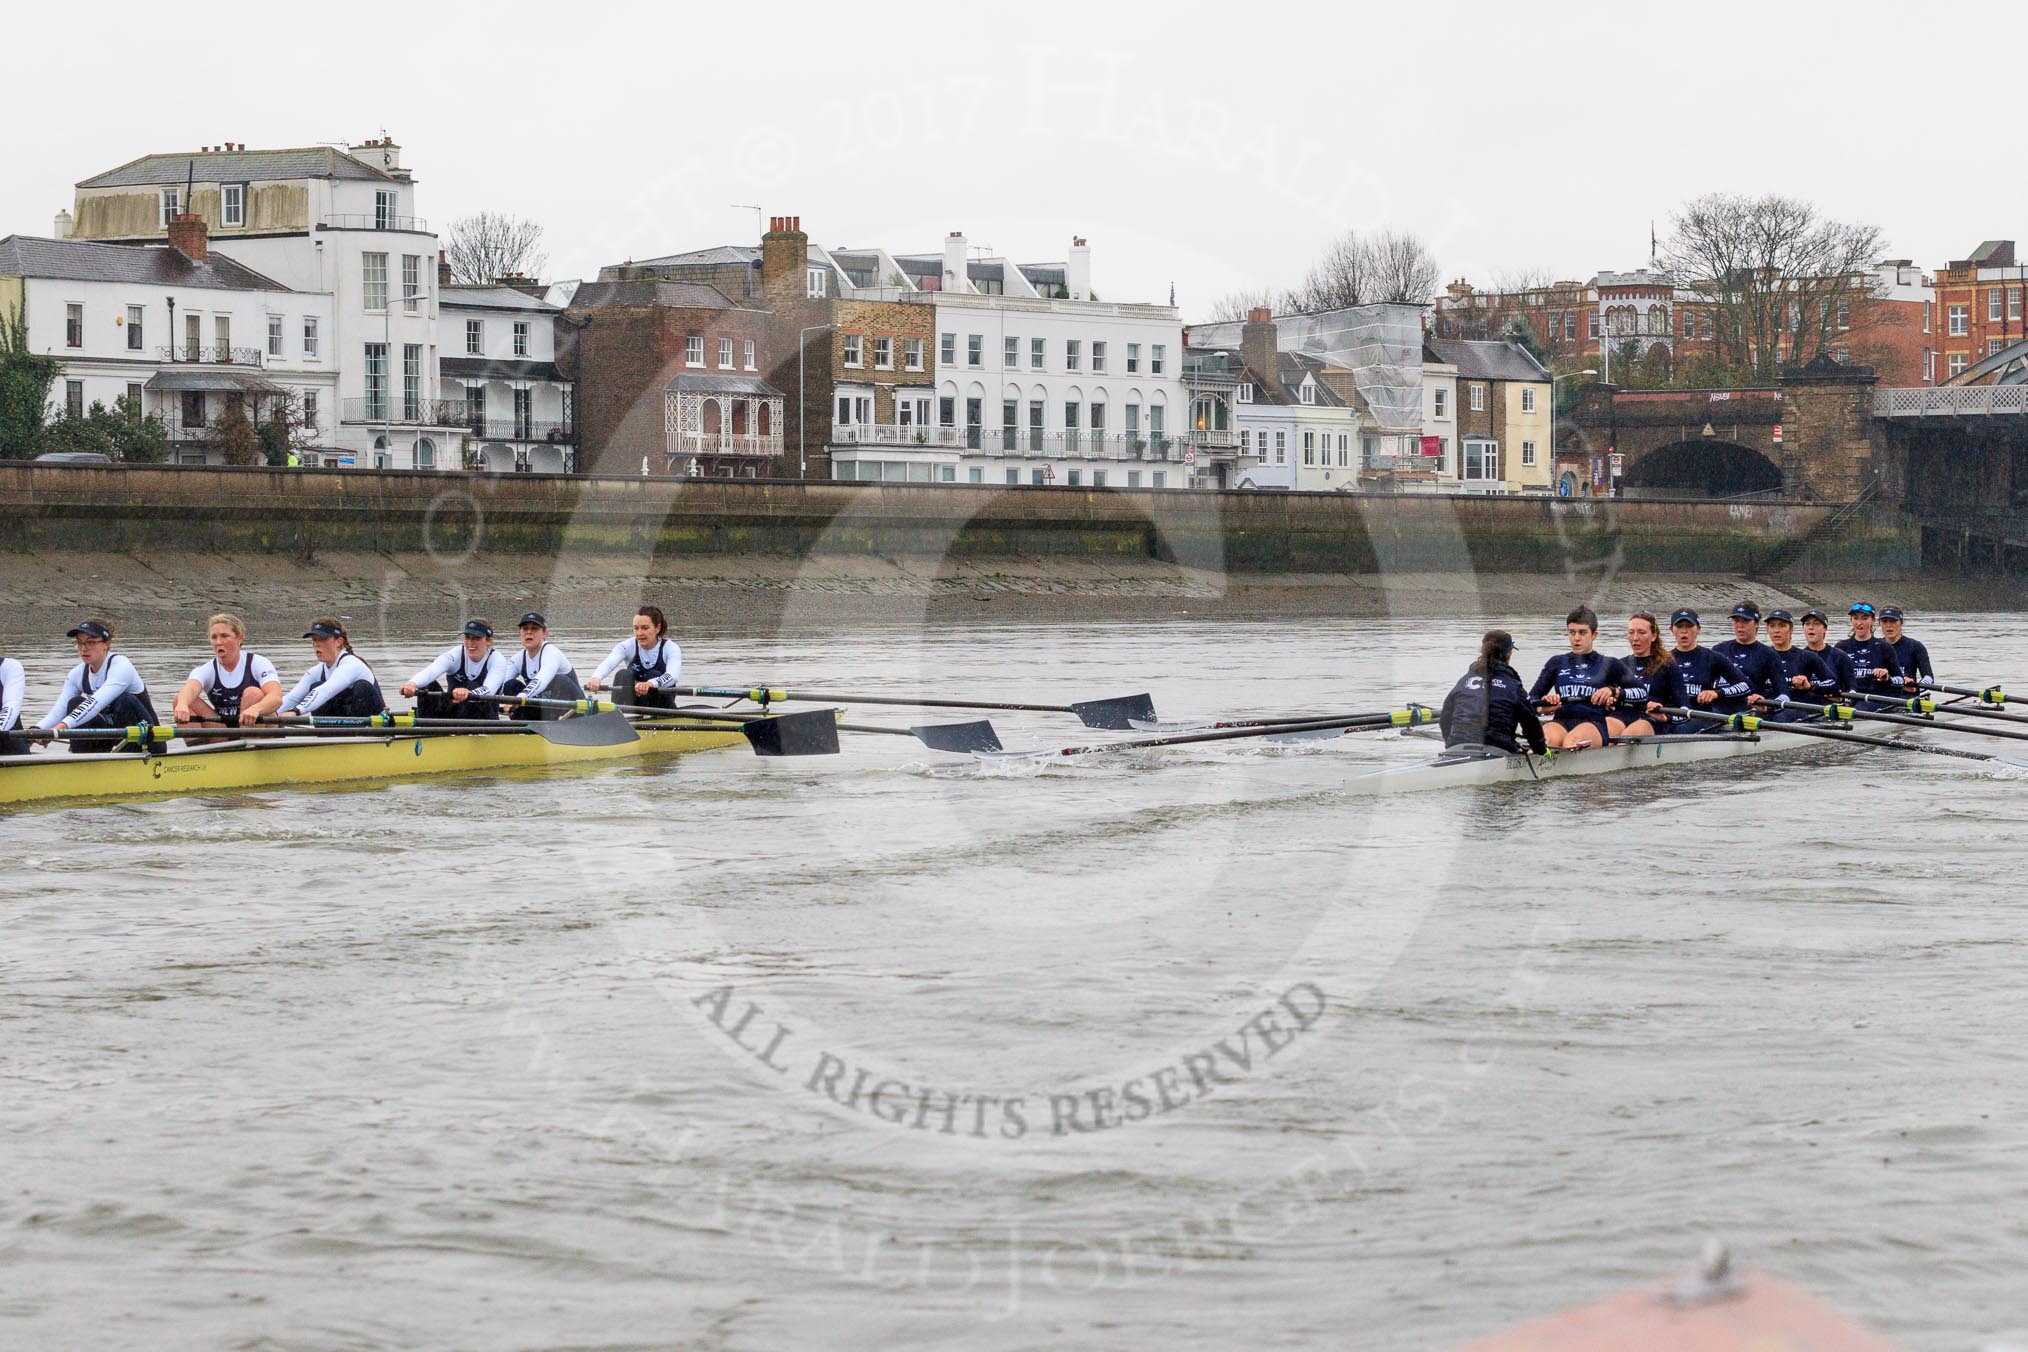 The Boat Race season 2018 - Women's Boat Race Trial Eights (OUWBC, Oxford): "Great Typhoon" and "Coursing River" approaching Barnes Railway Bridge.
River Thames between Putney Bridge and Mortlake,
London SW15,

United Kingdom,
on 21 January 2018 at 14:43, image #153